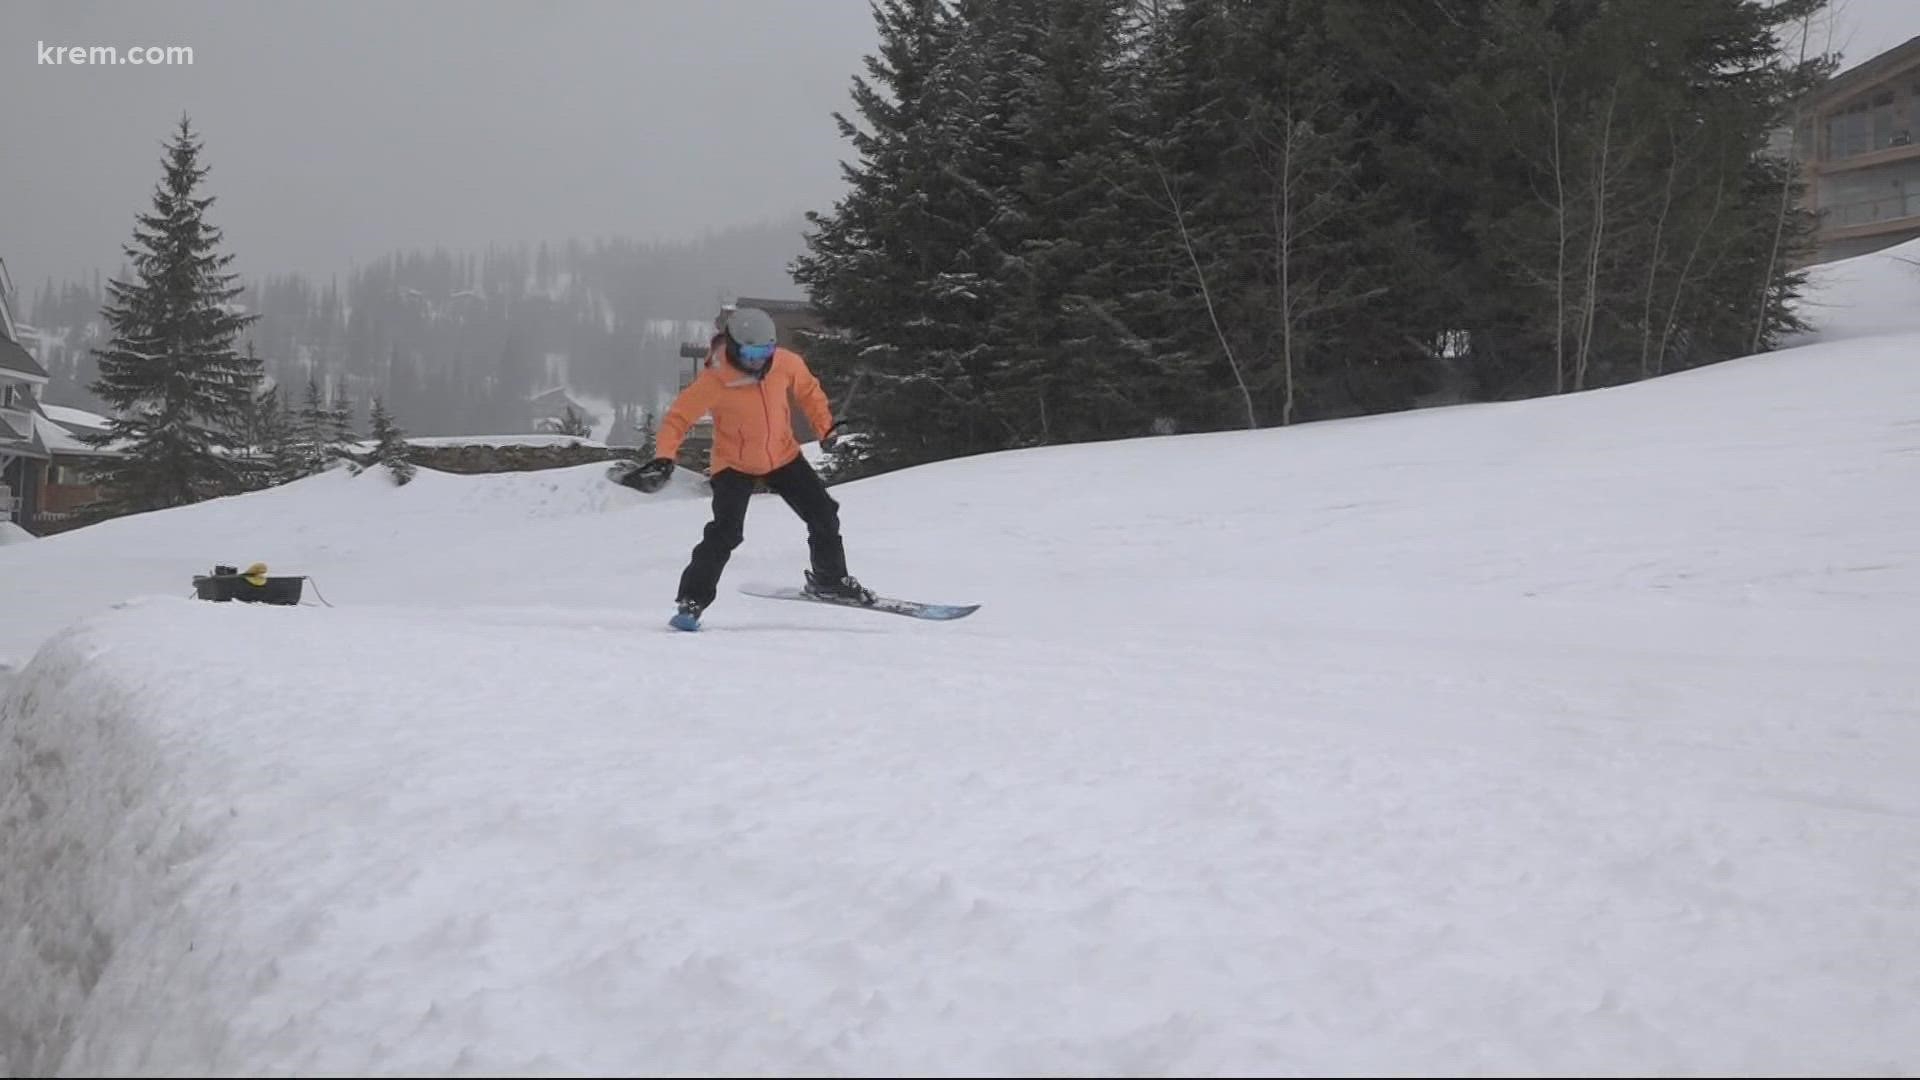 Skiers were greeted with fresh powder for the last day of Schweitzer's ski season